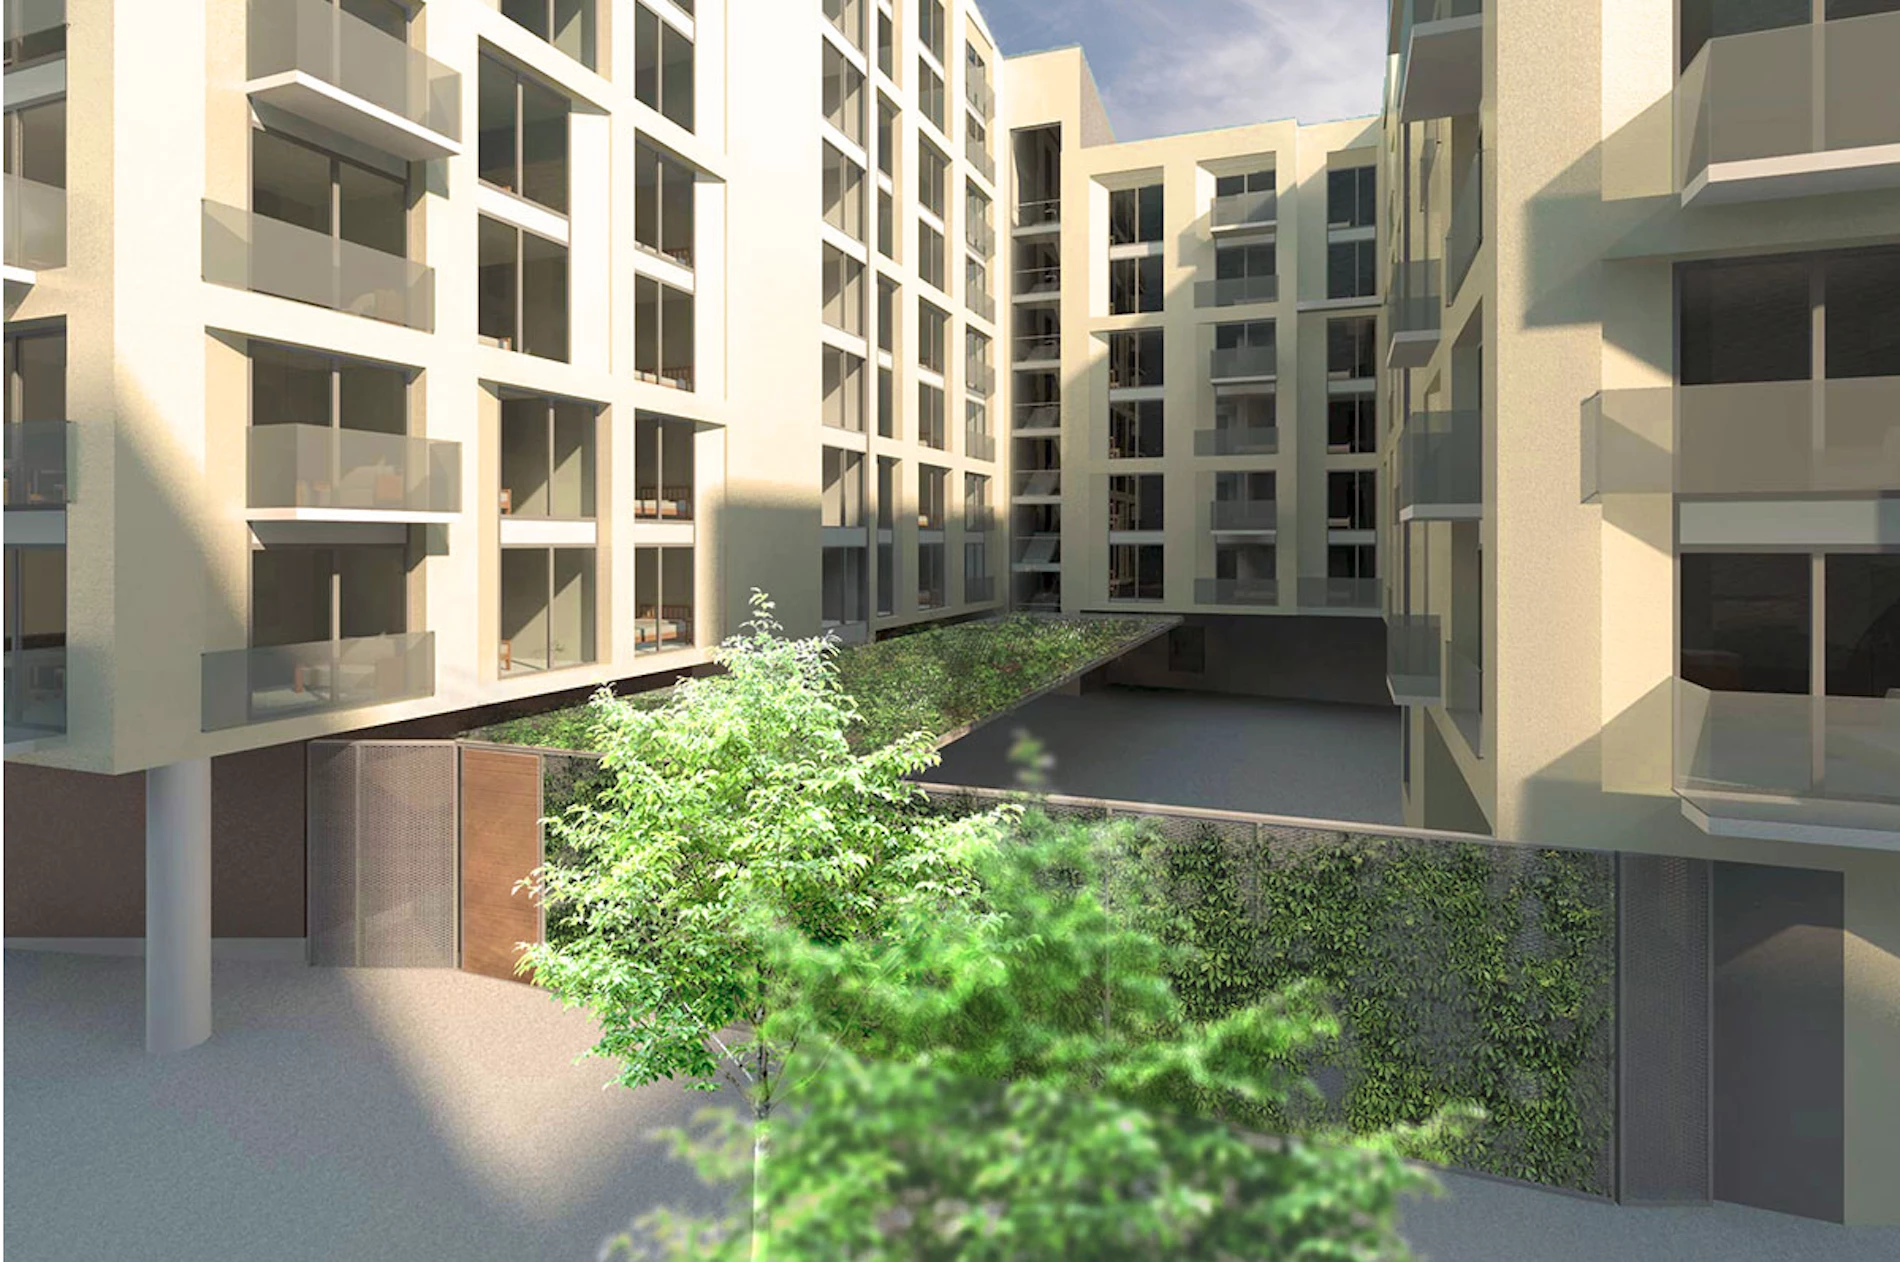 CGI of the 111 new homes PRS scheme in Kirkstall, Leeds.